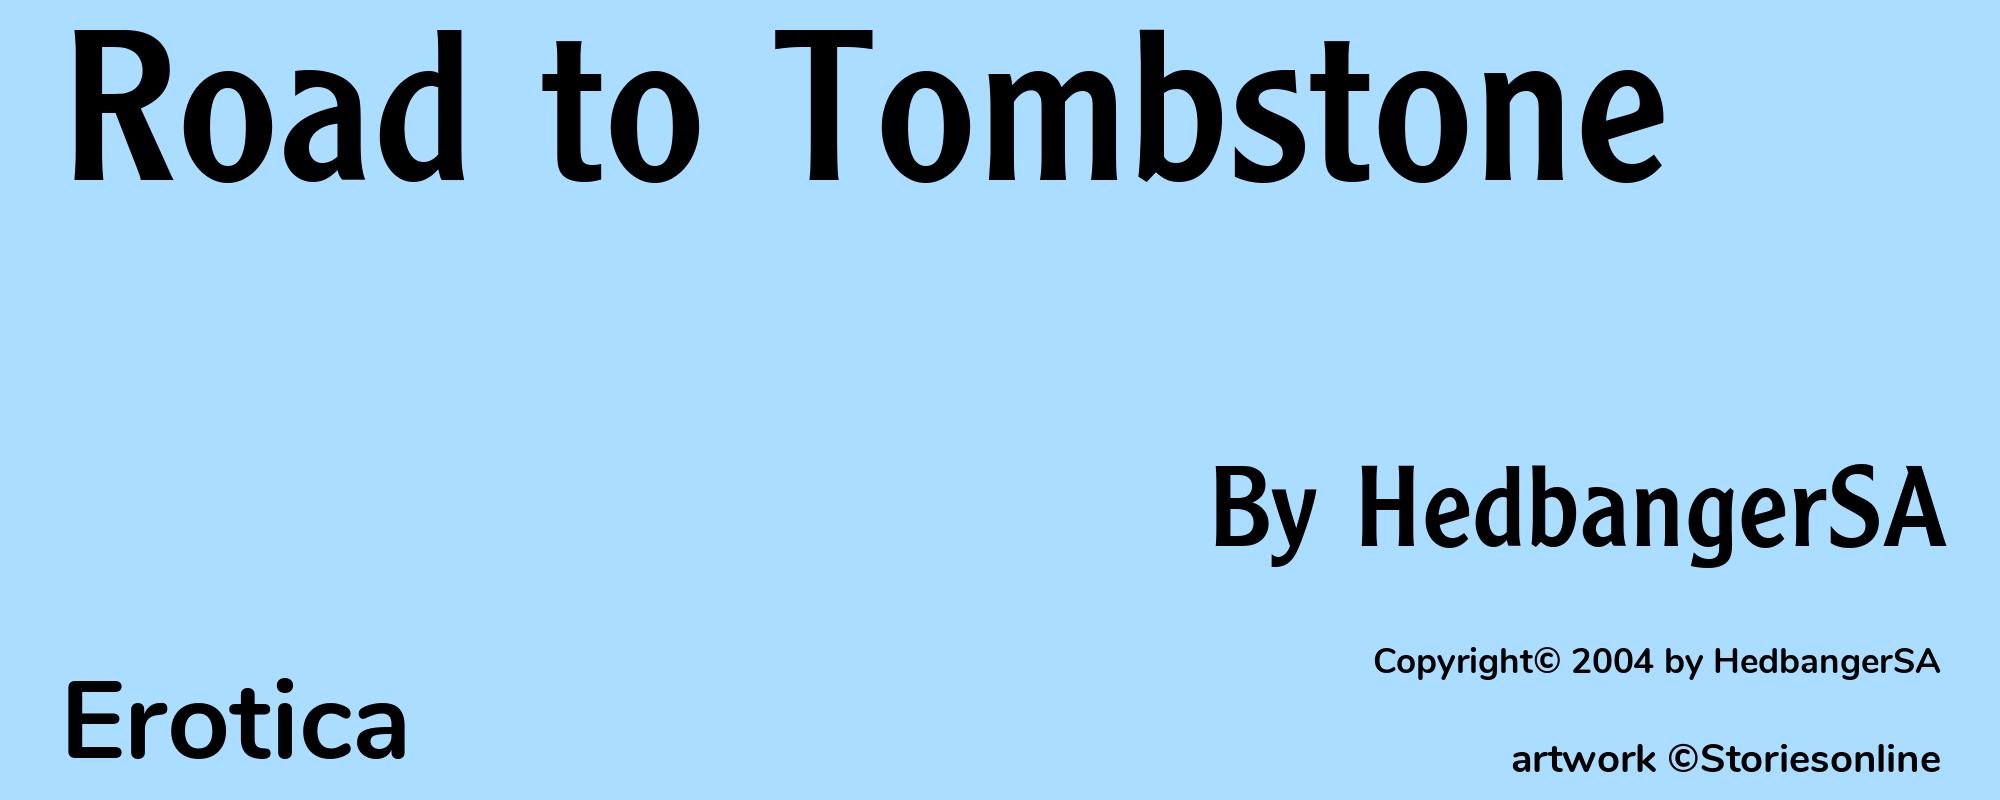 Road to Tombstone - Cover